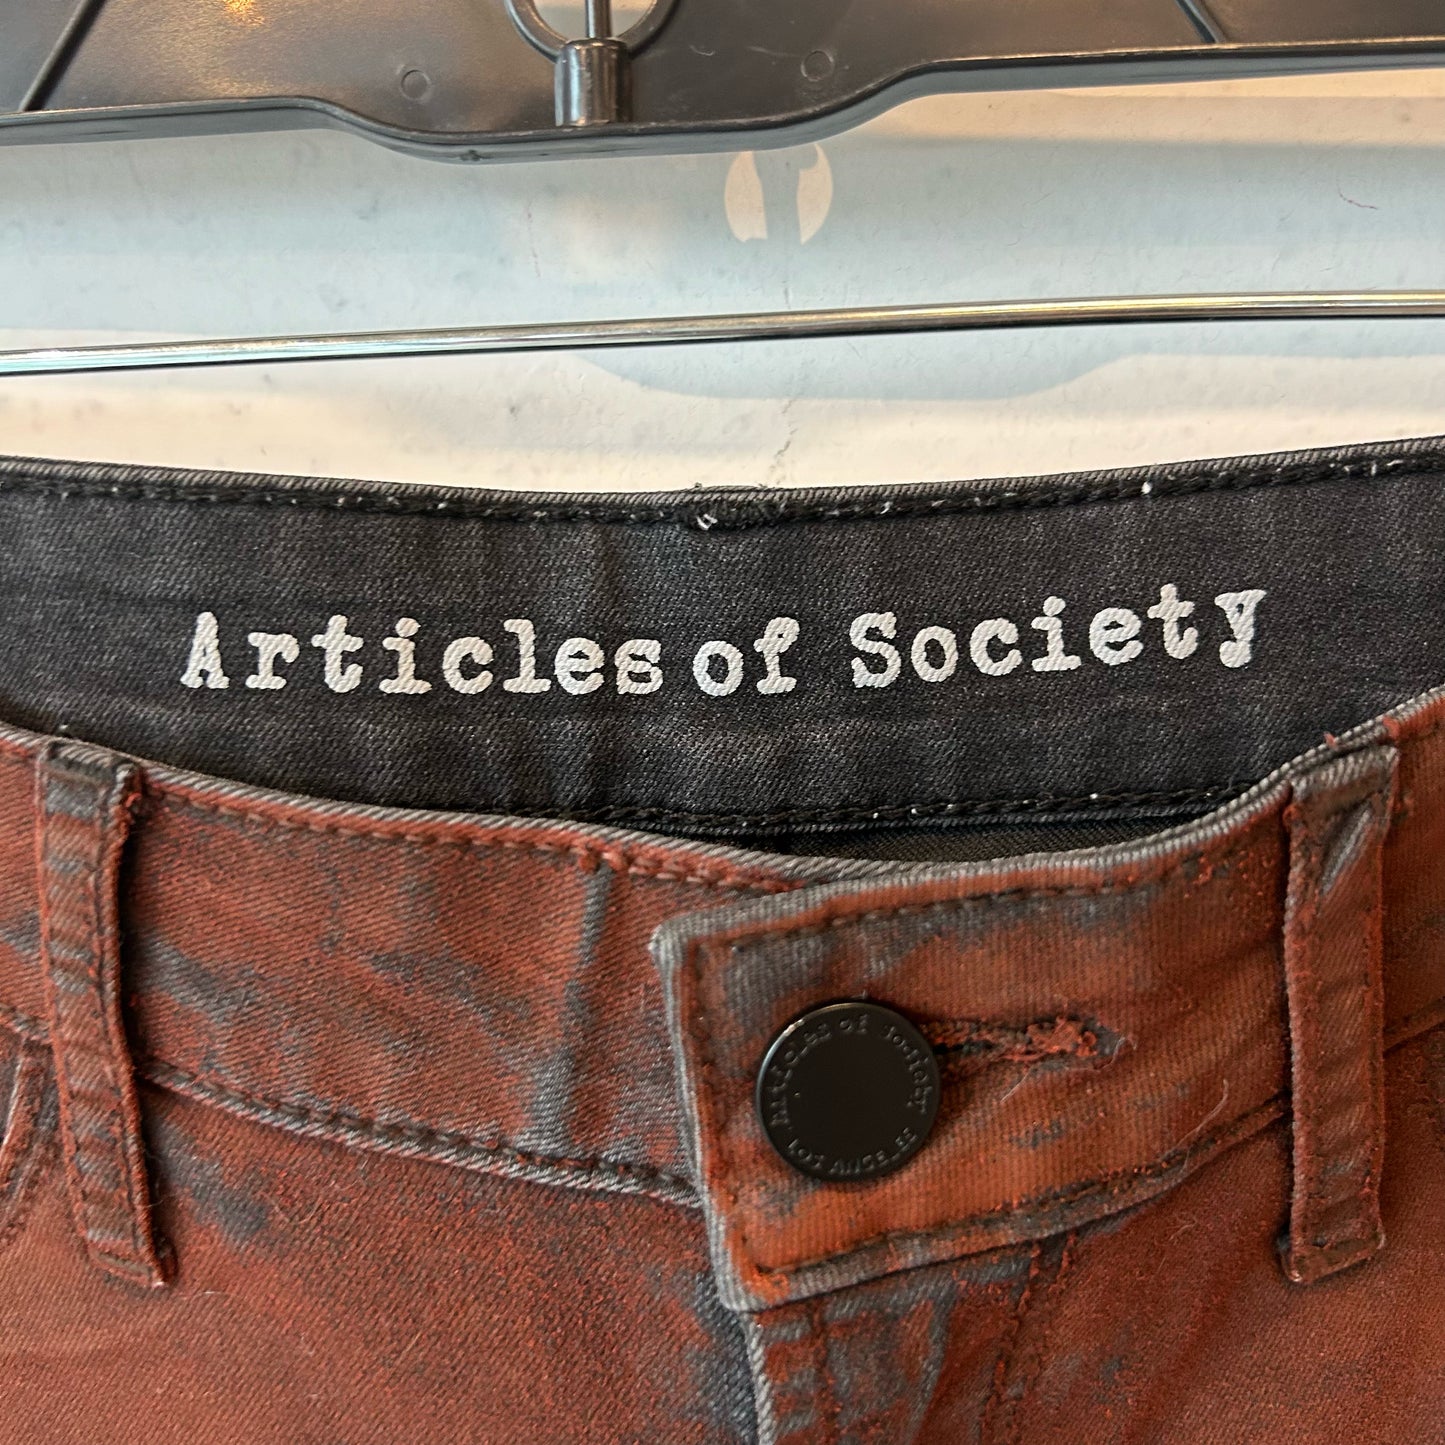 S/27 Articles of Society Burnt Orange Ombre Jeans